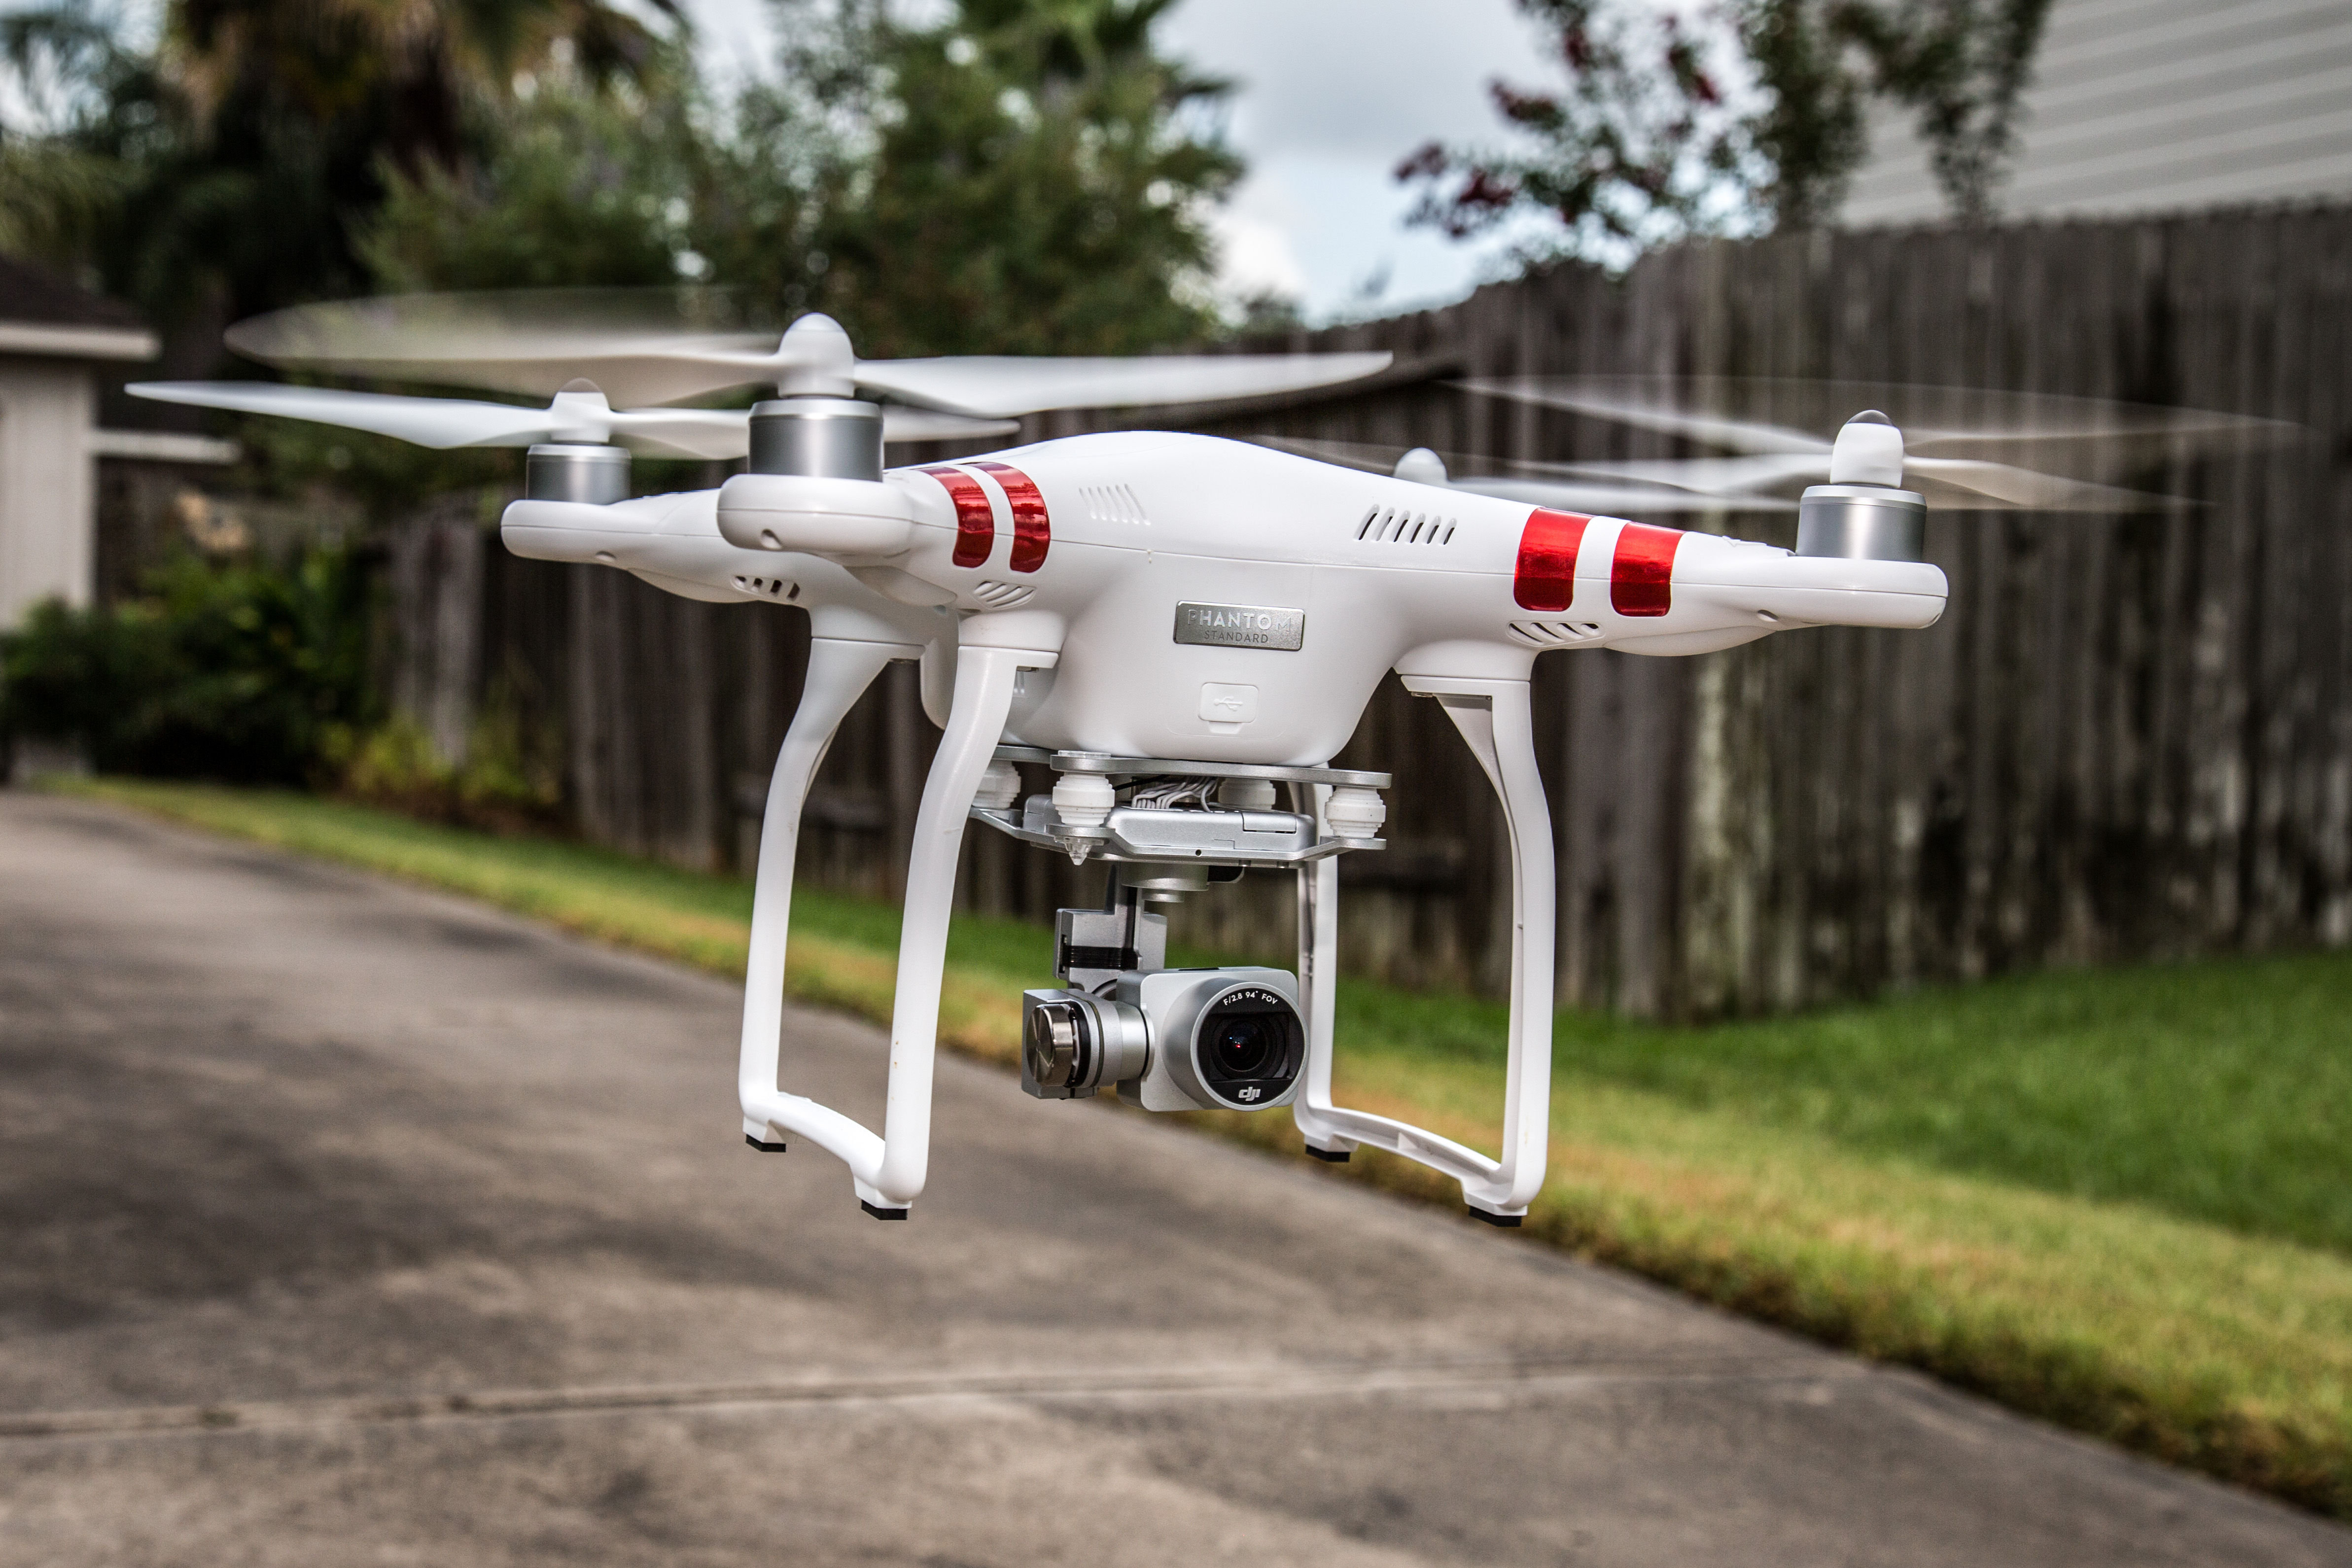 Um, wow. The DJI Phantom 3 Standard is marked down to an unbelievable